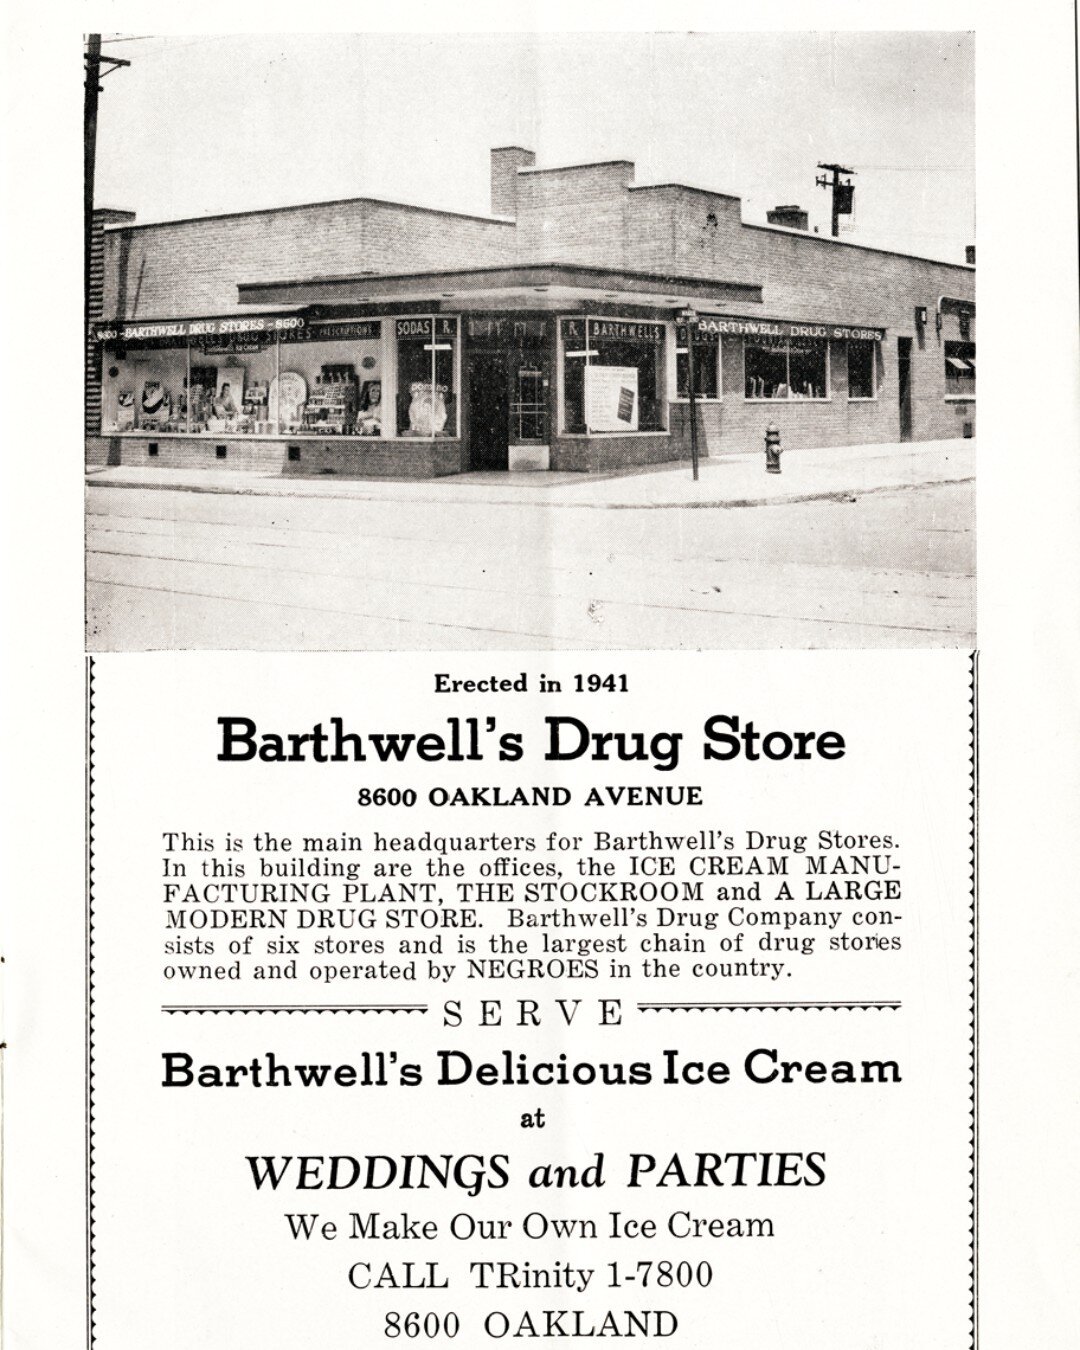 #InspiredBy Sidney Barthwell⁣
⁣
Sidney Barthwell was a Black entrepreneur who, at one time, owned the largest black-owned drugstore chain in the country...⁣
⁣
Learn more at https://bit.ly/bbabarthwell